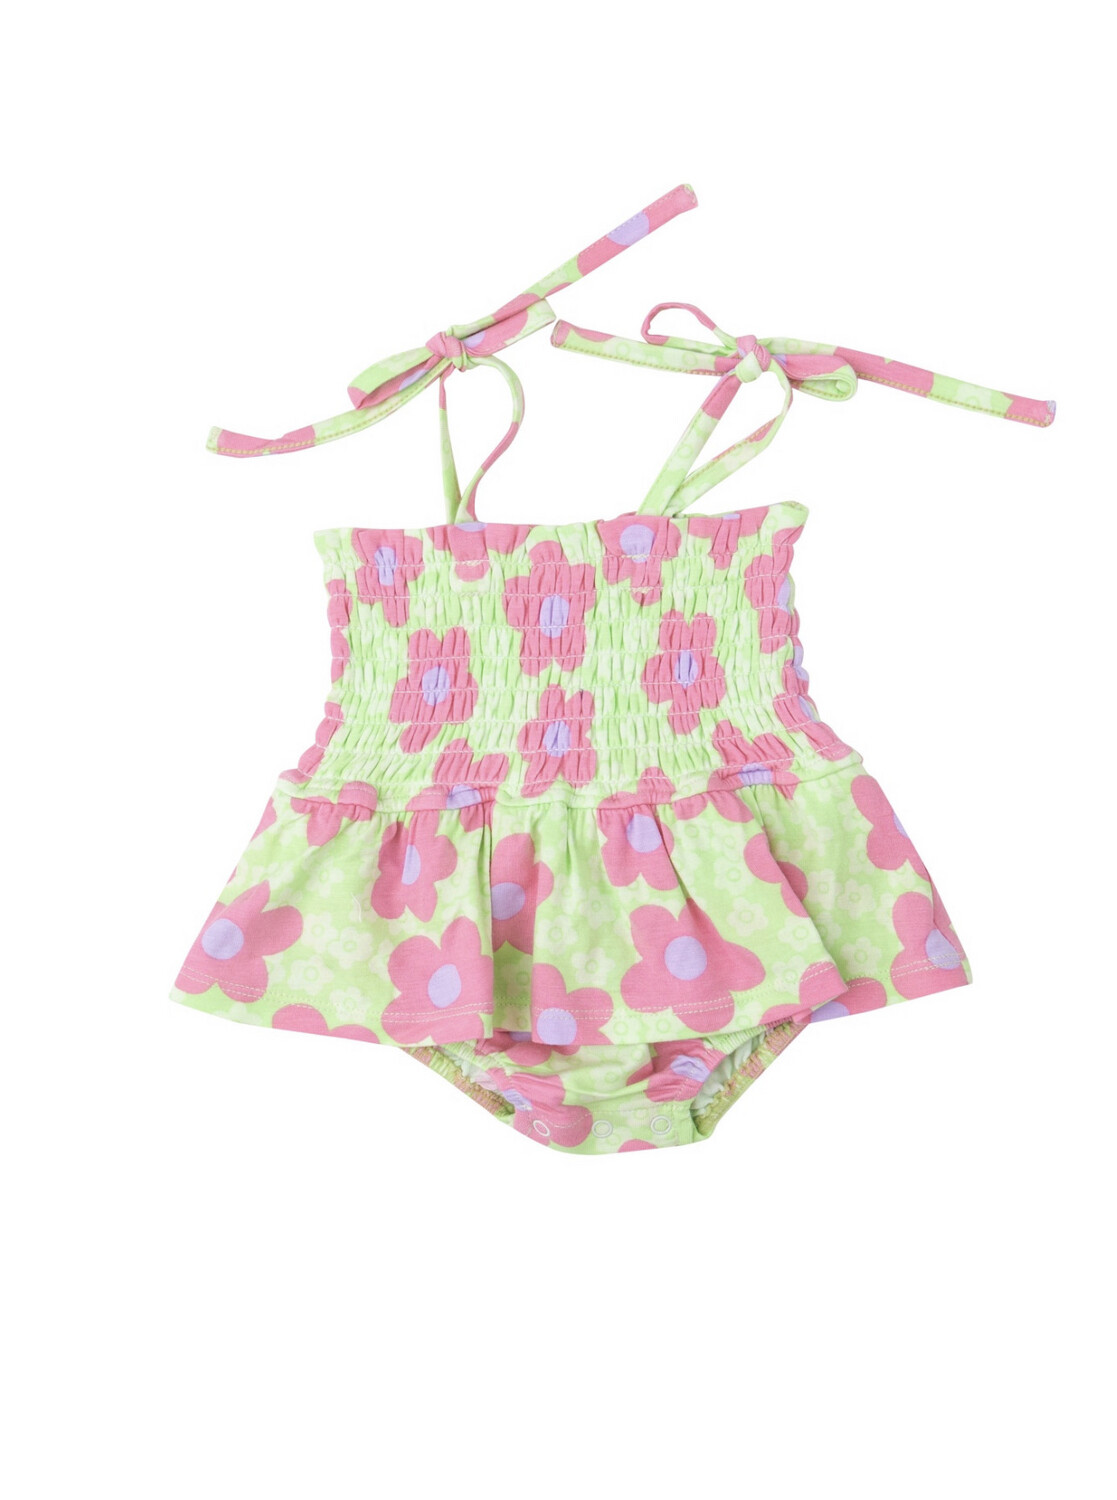 Daisy Pop Smocked Bubble with Skirt